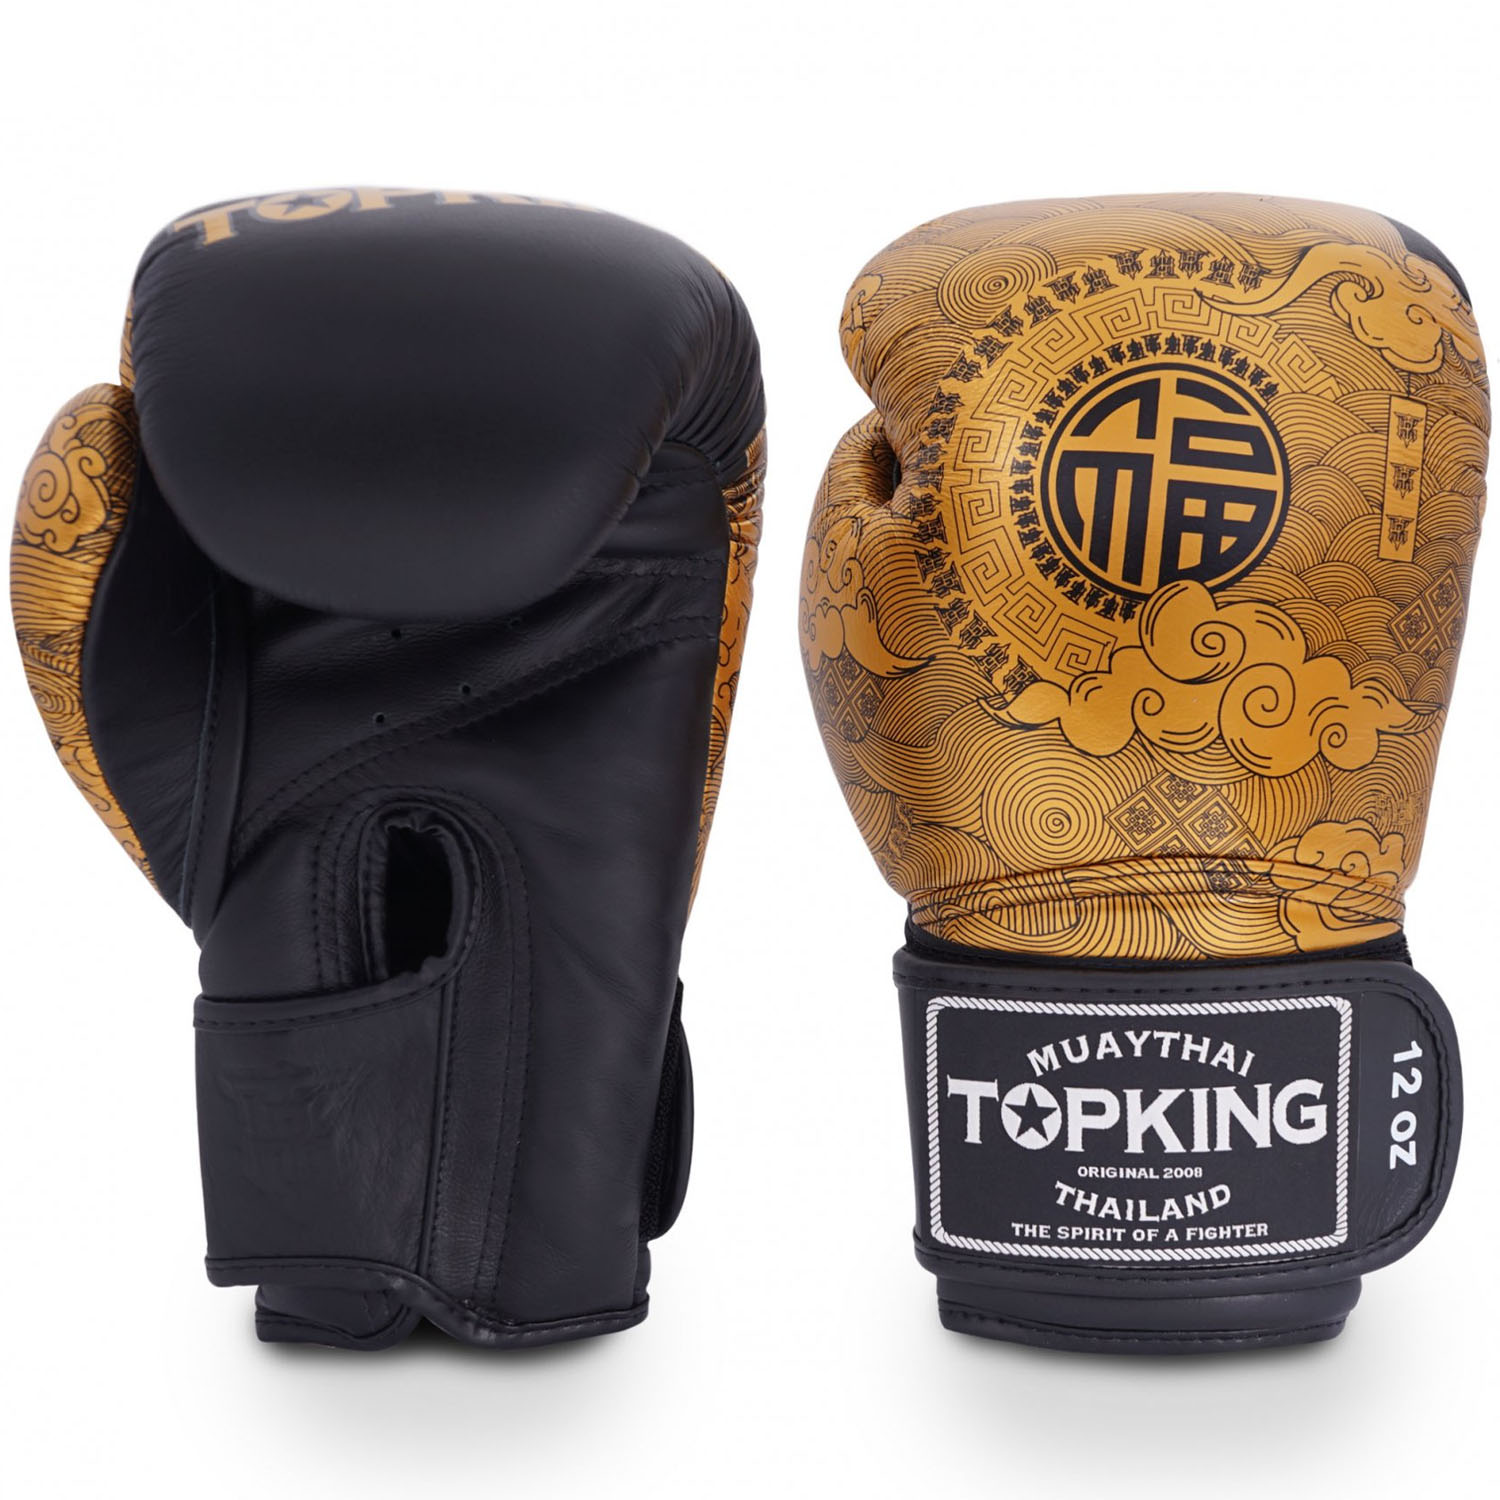 buy in Shop our Leather Boxing a huge brands | of selection Gloves